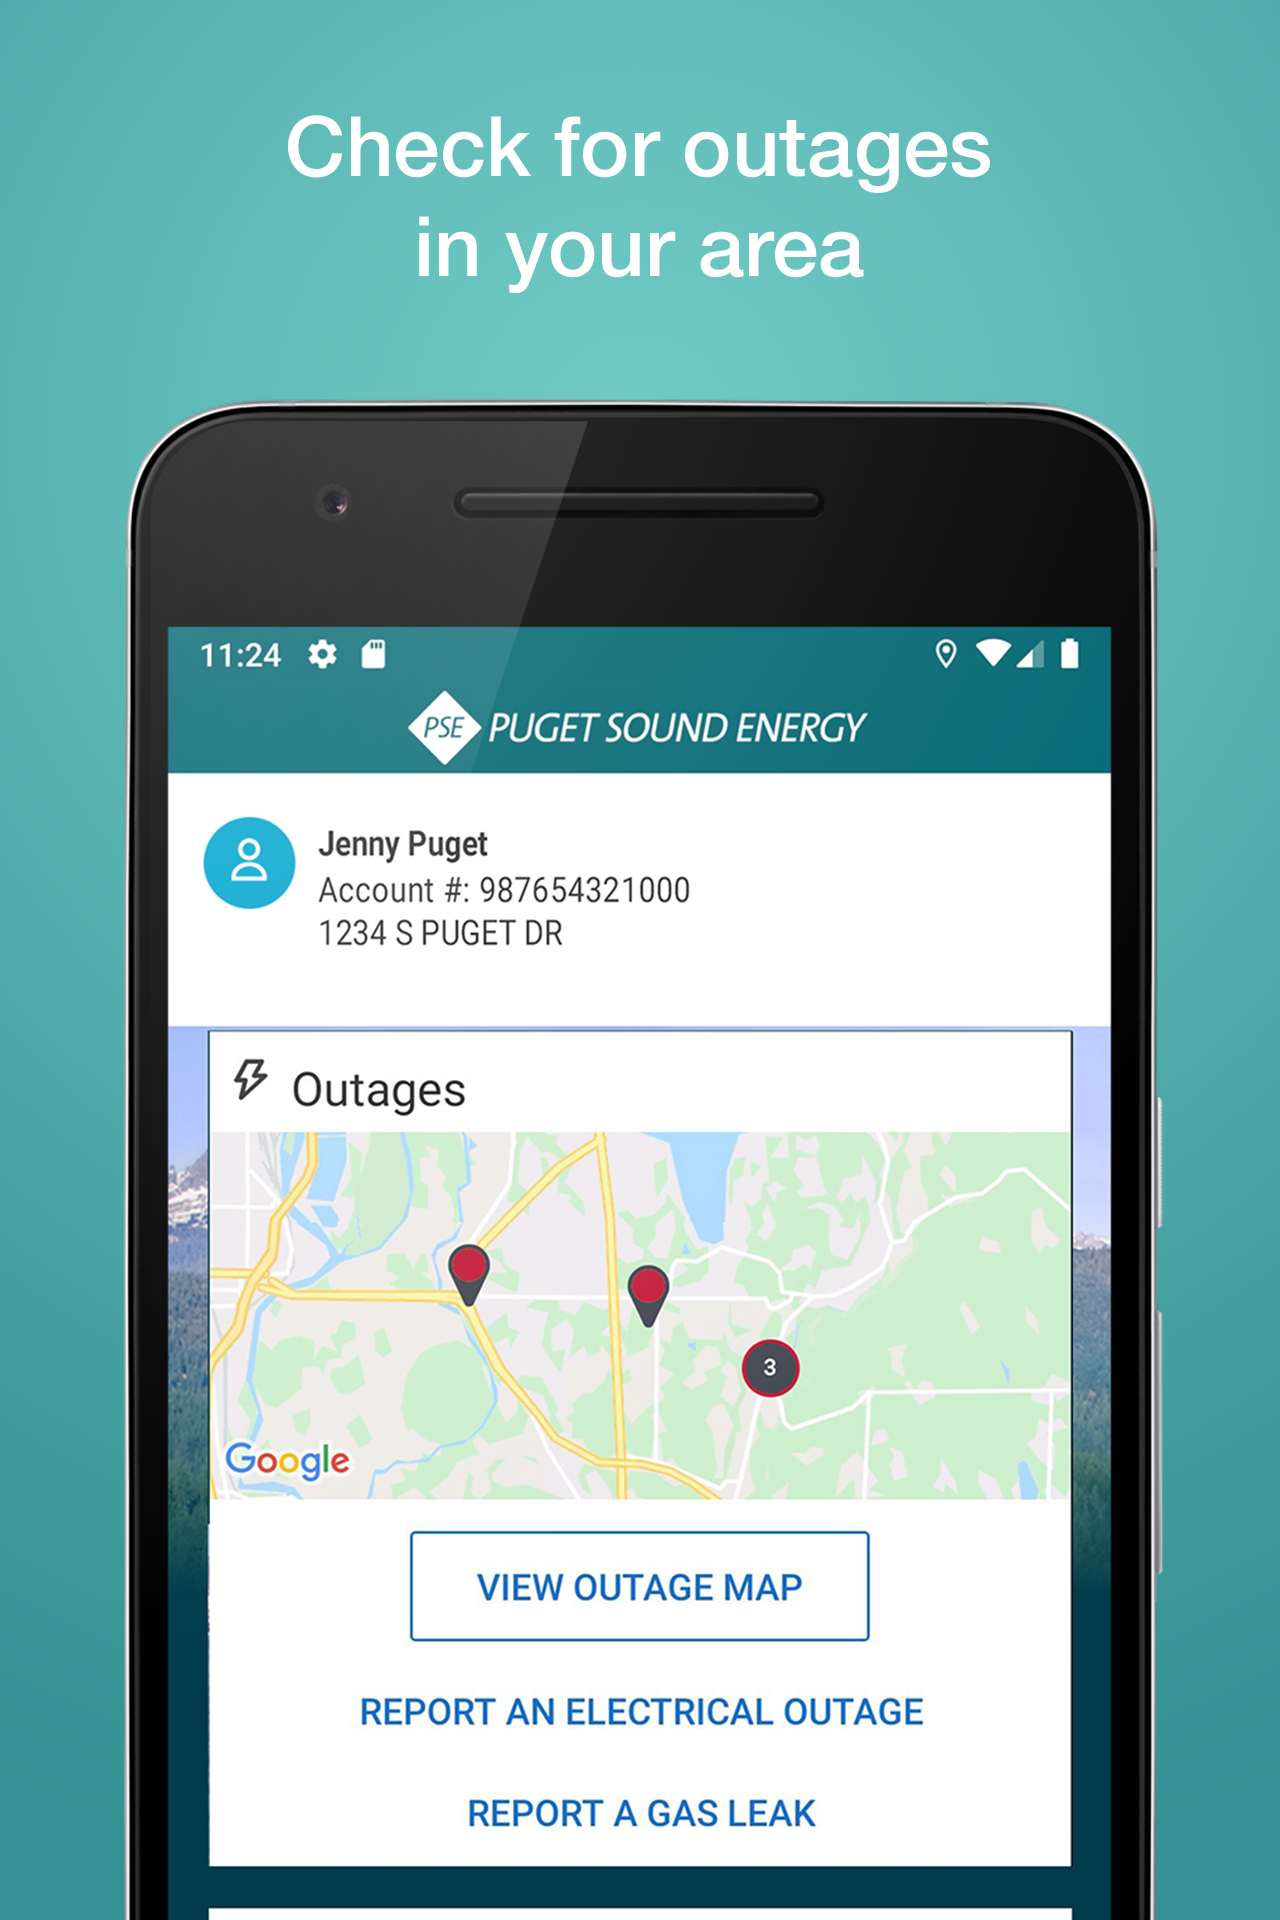 Android application myPSE from Puget Sound Energy screenshort